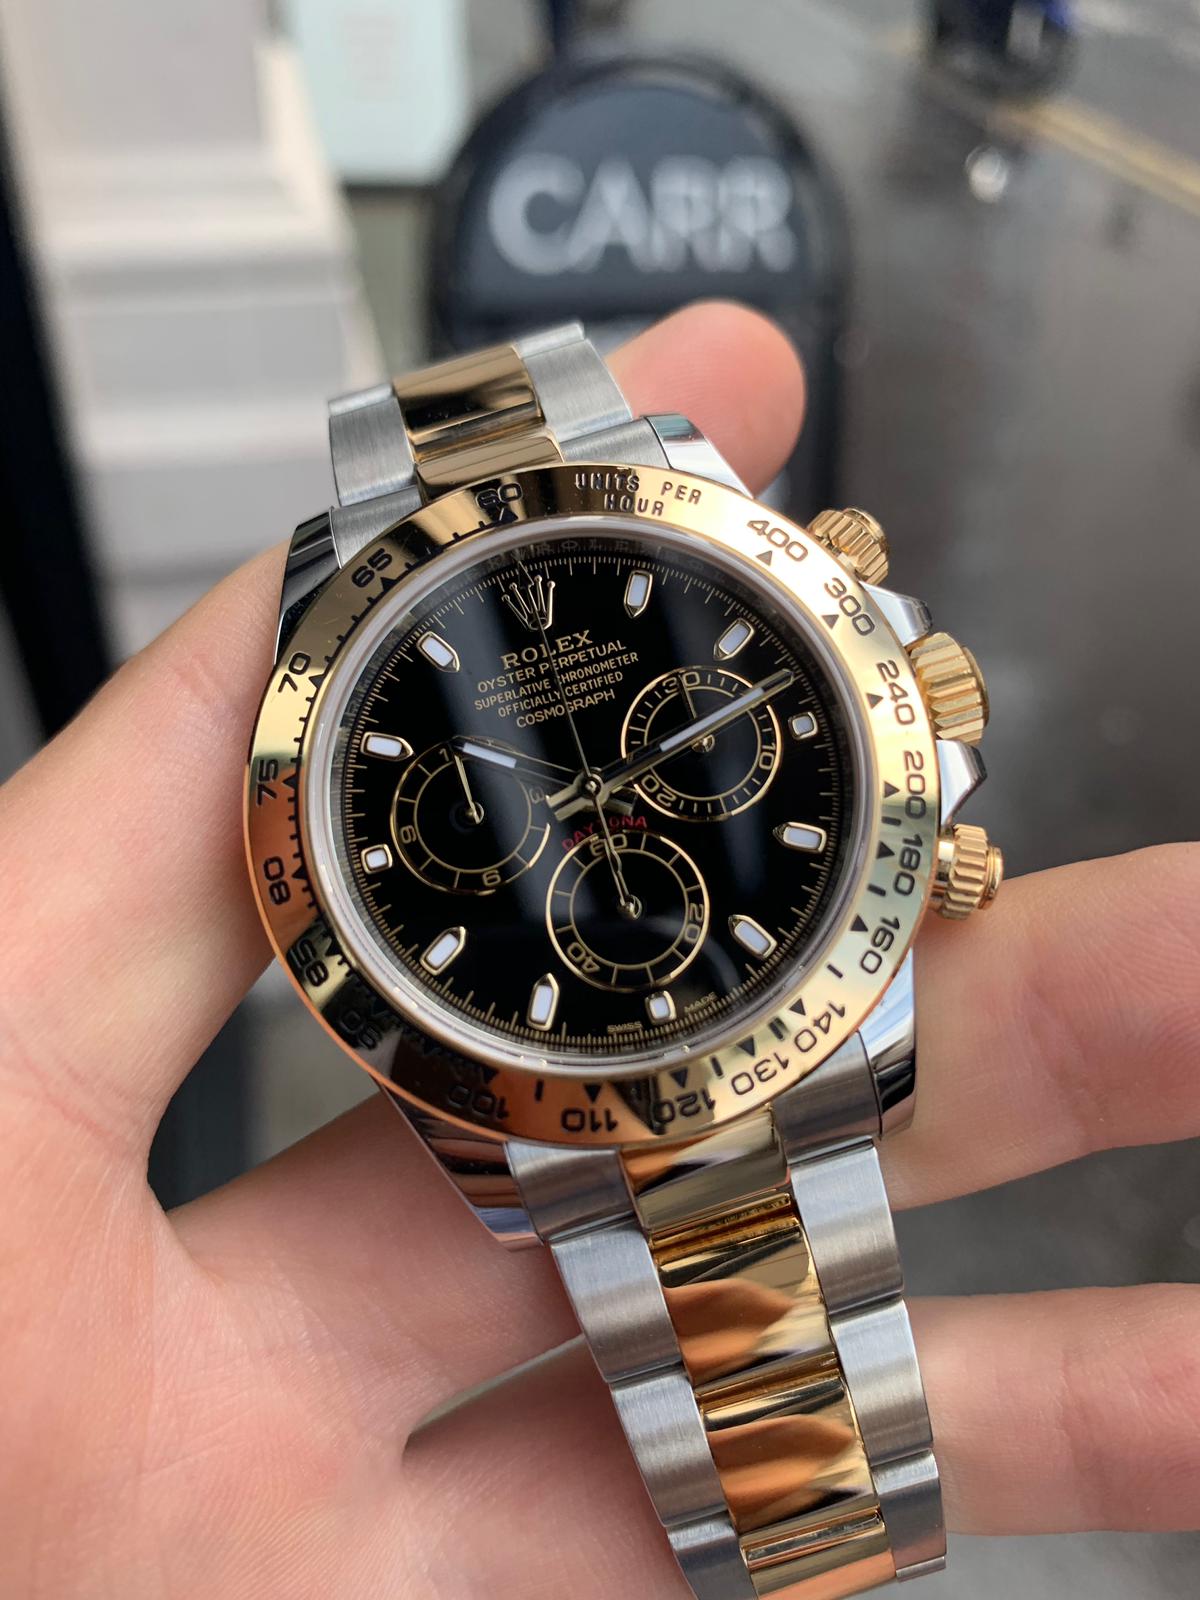 ROLEX COSMOGRAPH DAYTONA STEEL & GOLD 116503 - Carr Watches